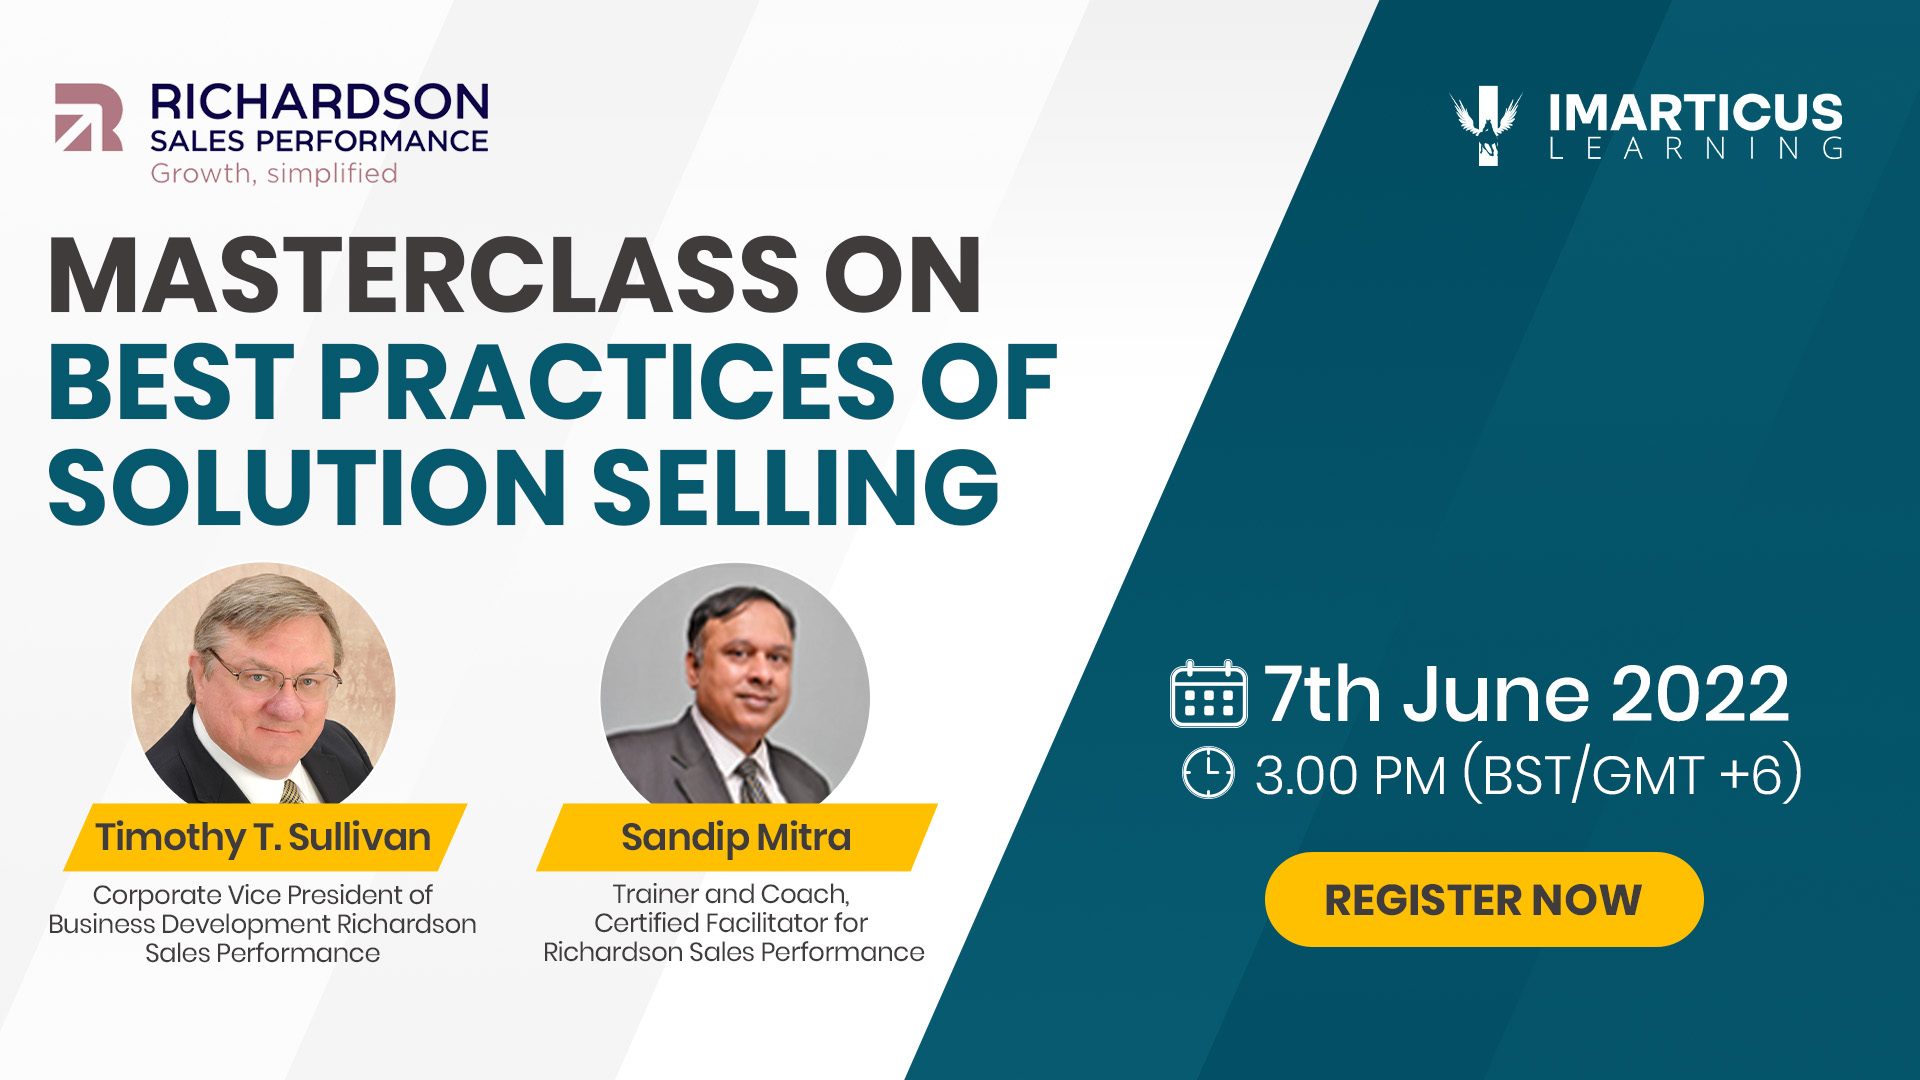 Masterclass on Best Practices of Solution Selling, Online Event